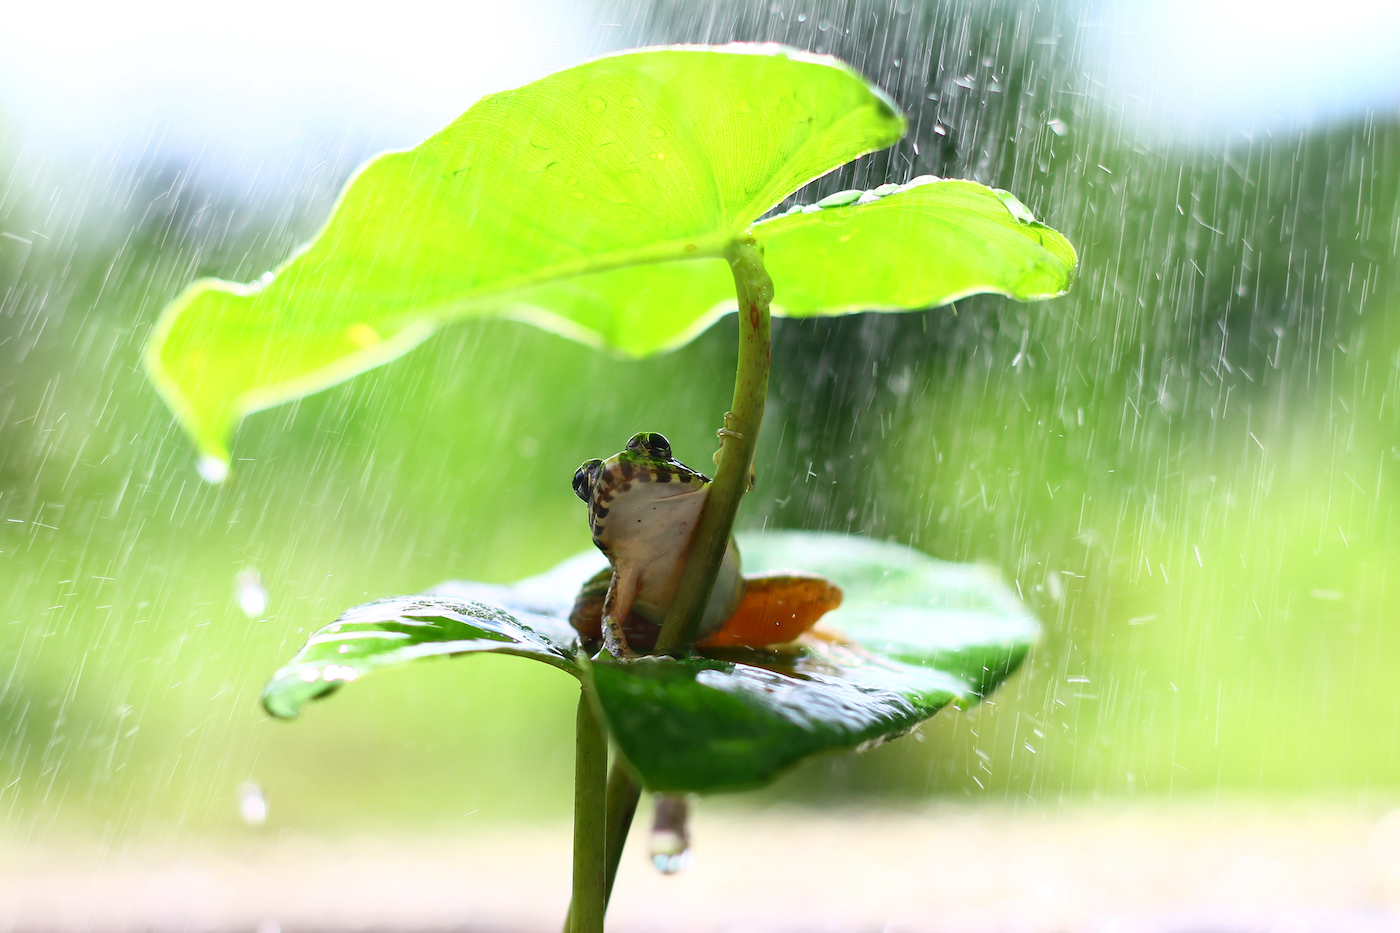 A small green frog sitting on a leaf takes shelter from the rain